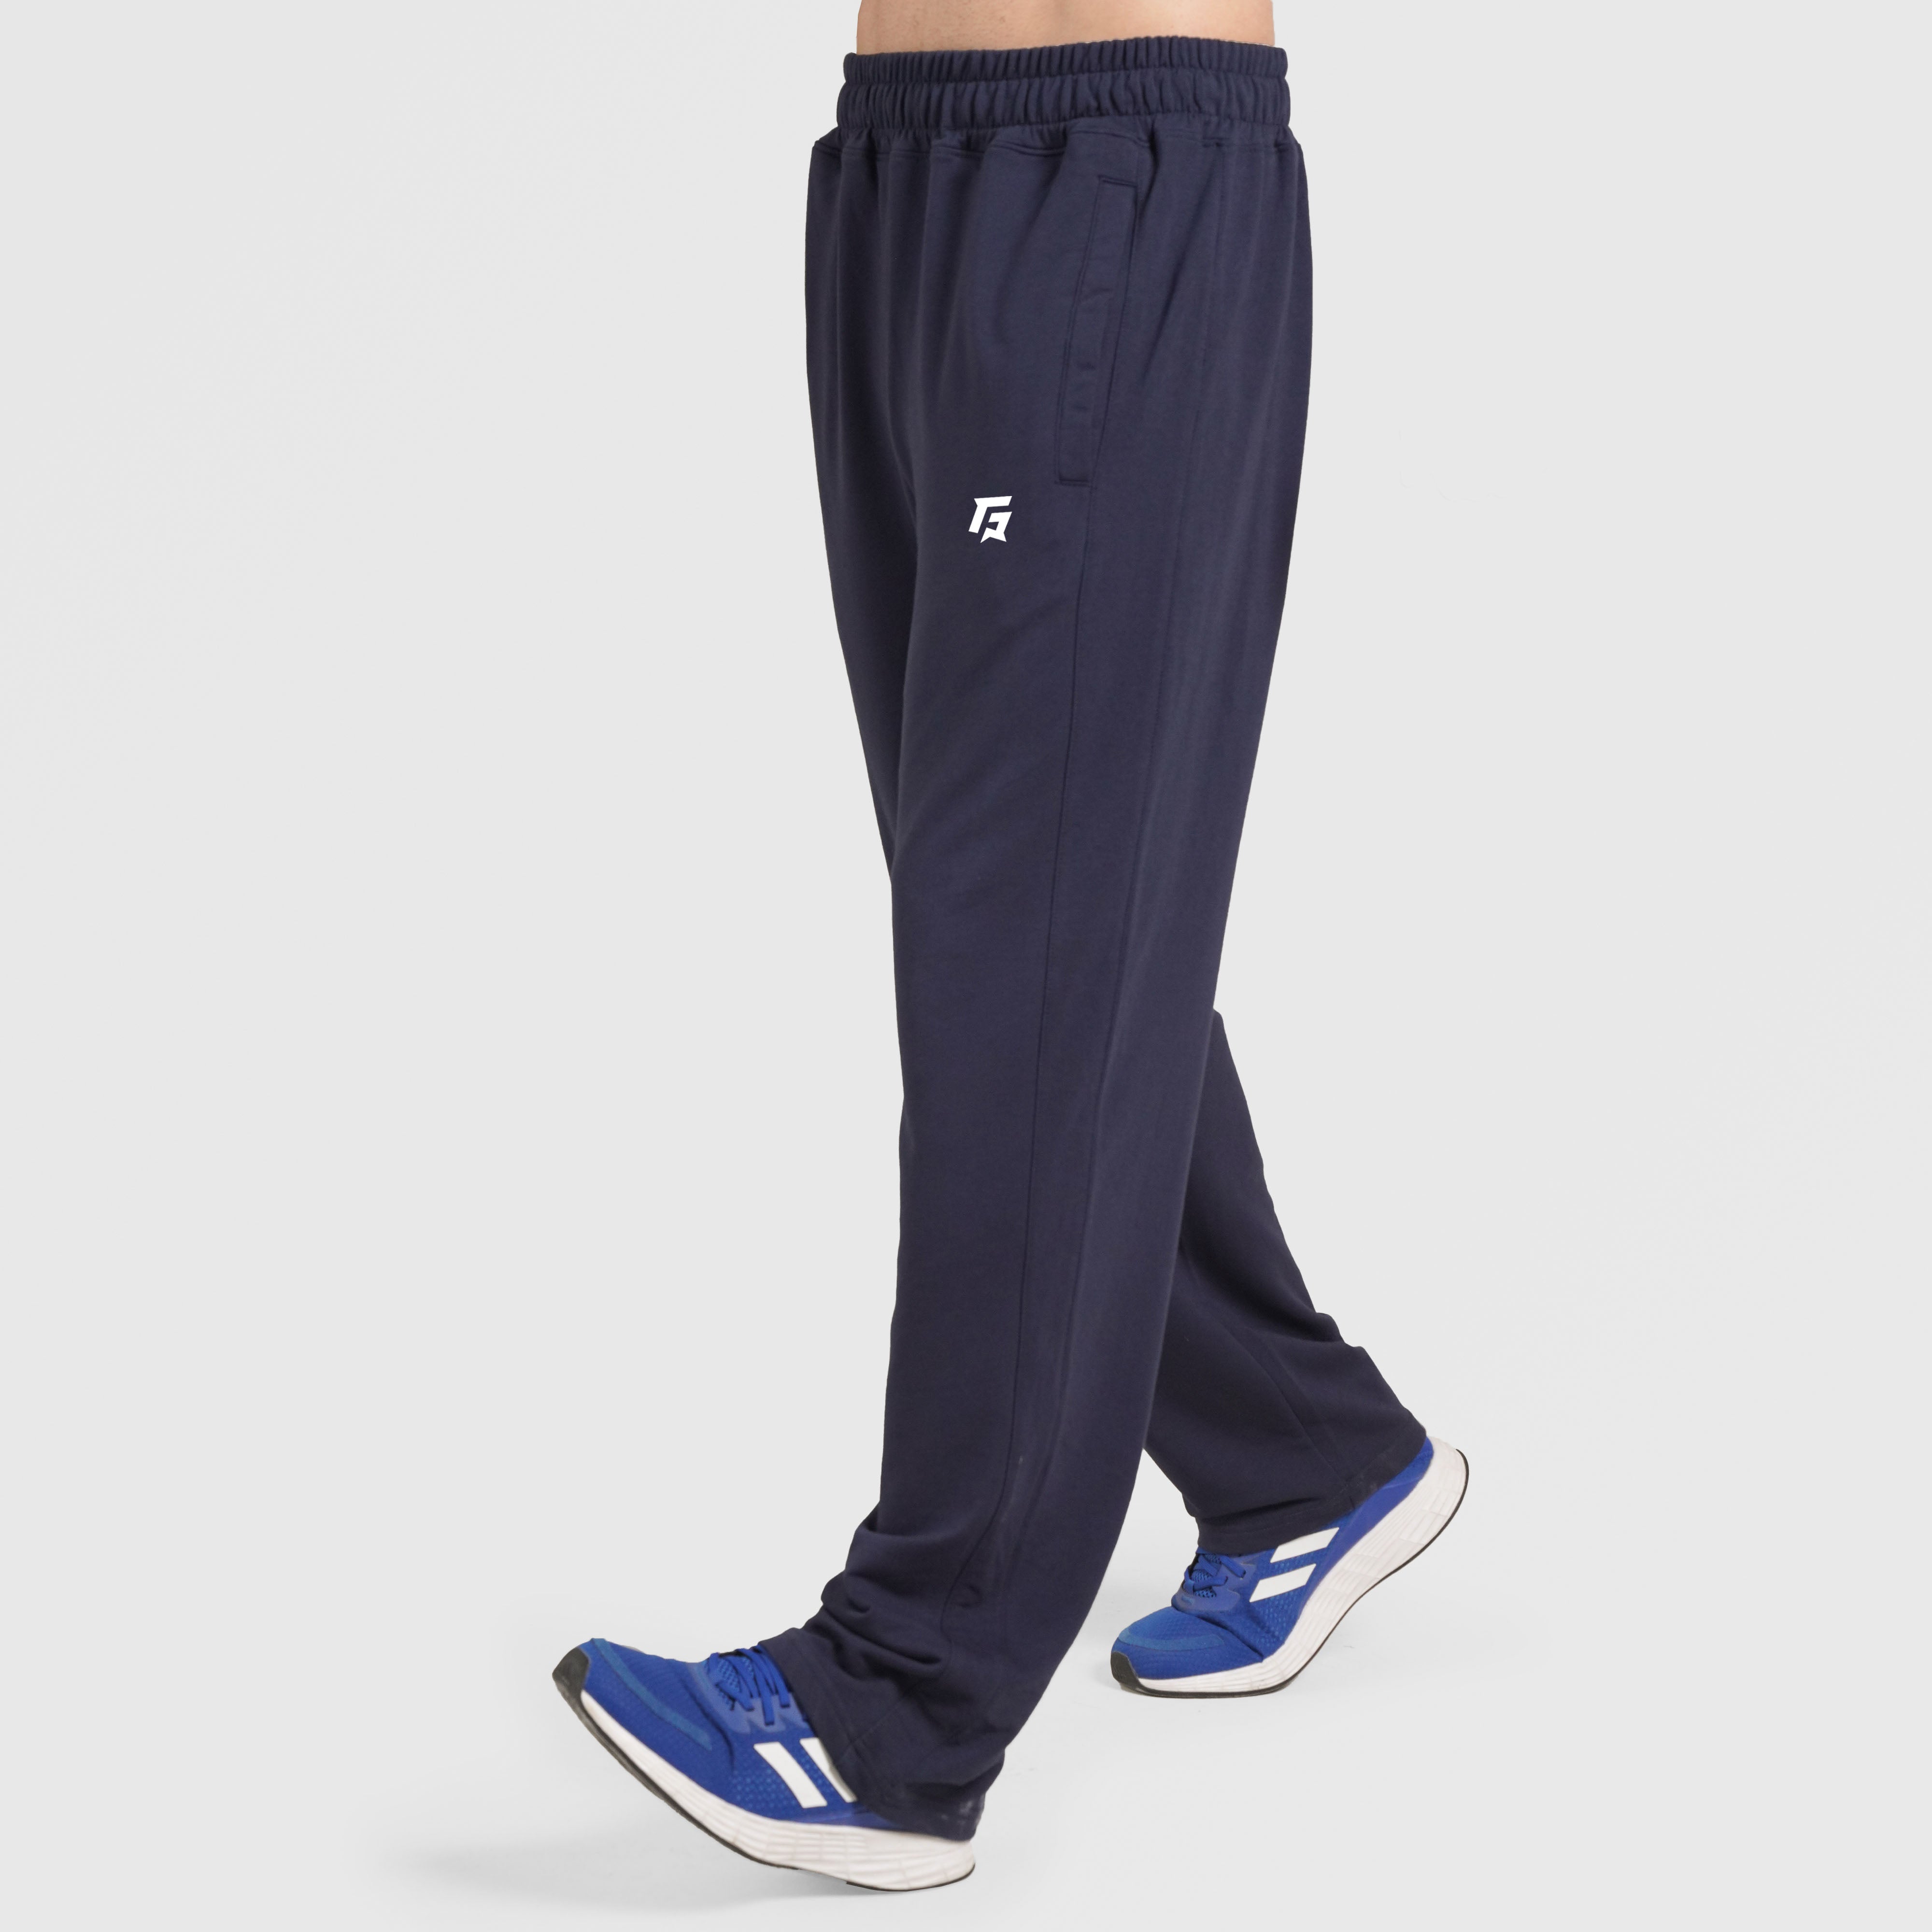 Respite Trousers (Navy)